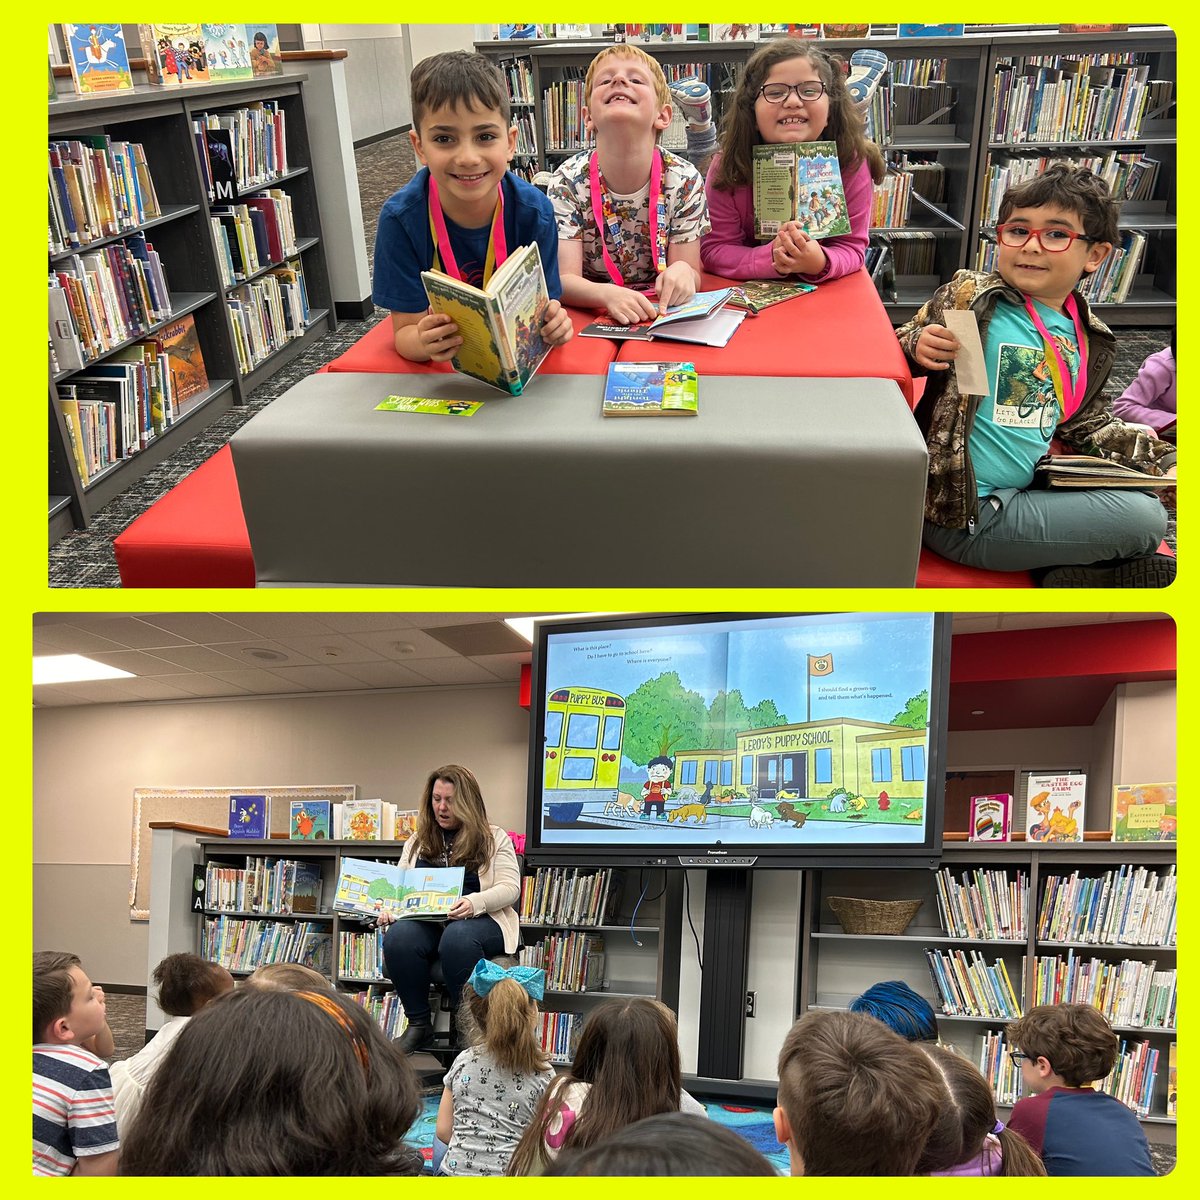 Library day is always treat! Mrs. Bowles chooses the best books to share with our Bearkats! @BlackESLibrary @CyFairISD @BlackBearkats #BOTB